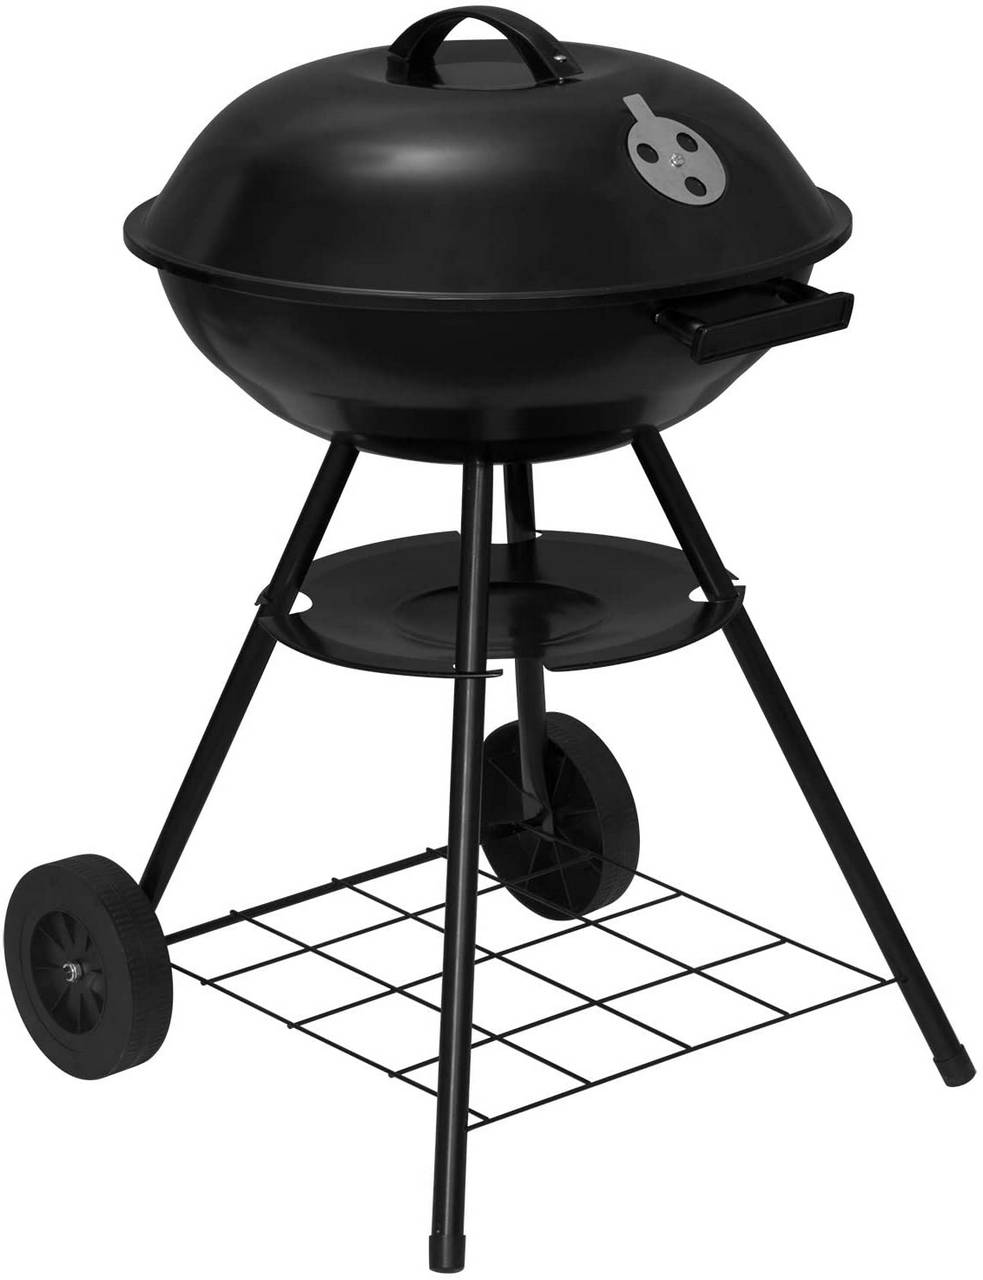 Black Cast Iron Charcoal BBQ Barbeque Grill, For outdoor, Size: 44